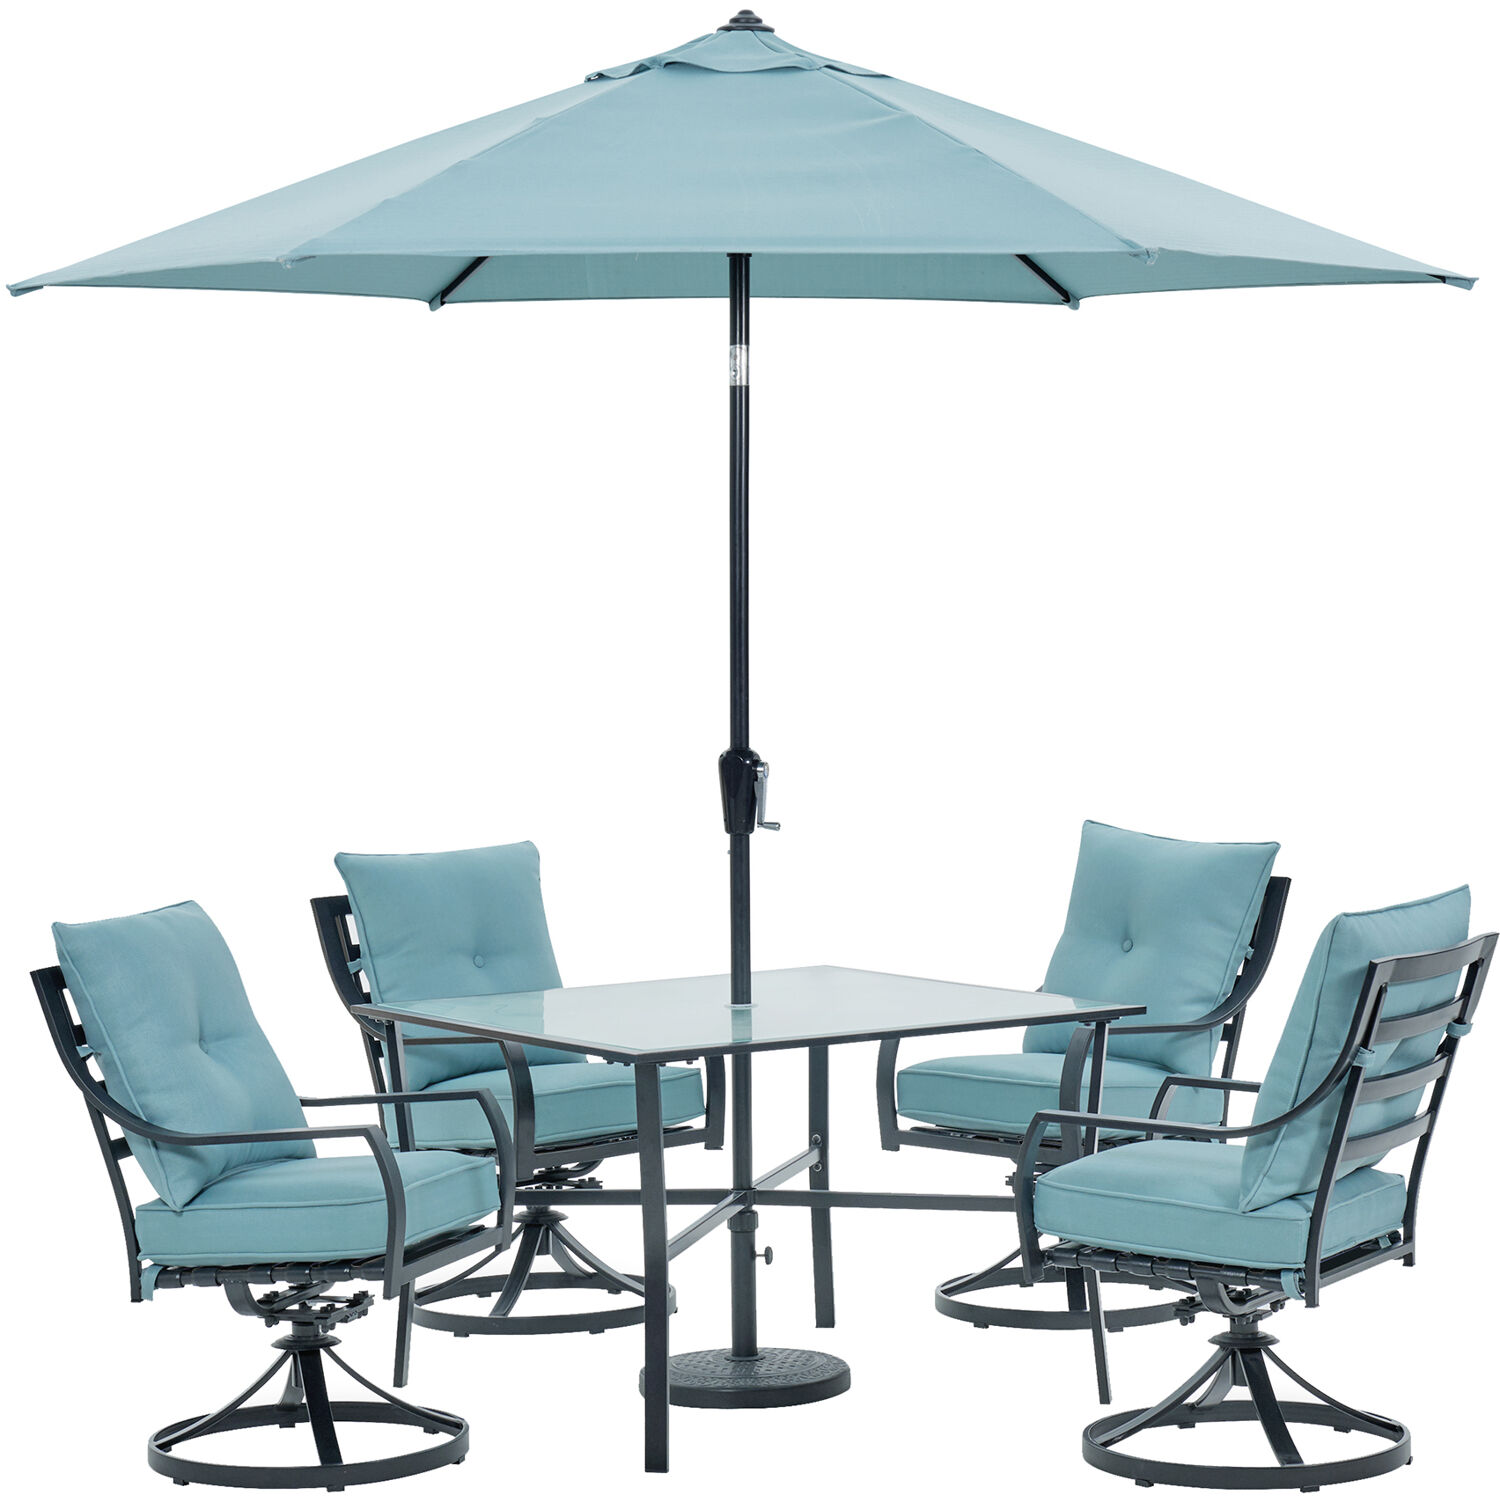 Hanover Lavallette 5-Piece Modern Outdoor Dining Set with Umbrella - image 1 of 14